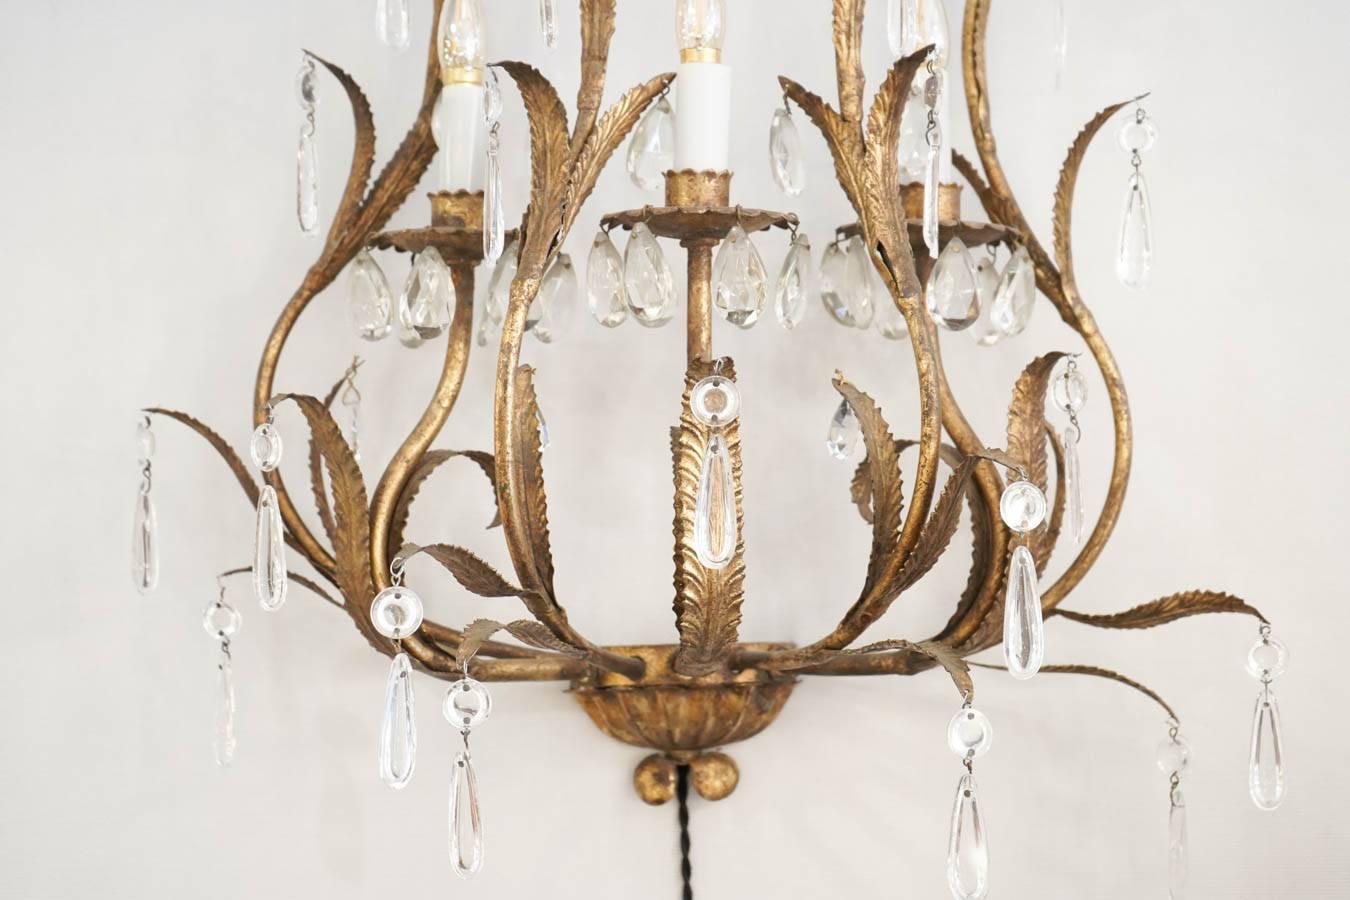 Iron Pair of Sconces in Gold gilt metal with crystals, 1950-1960, Three lights